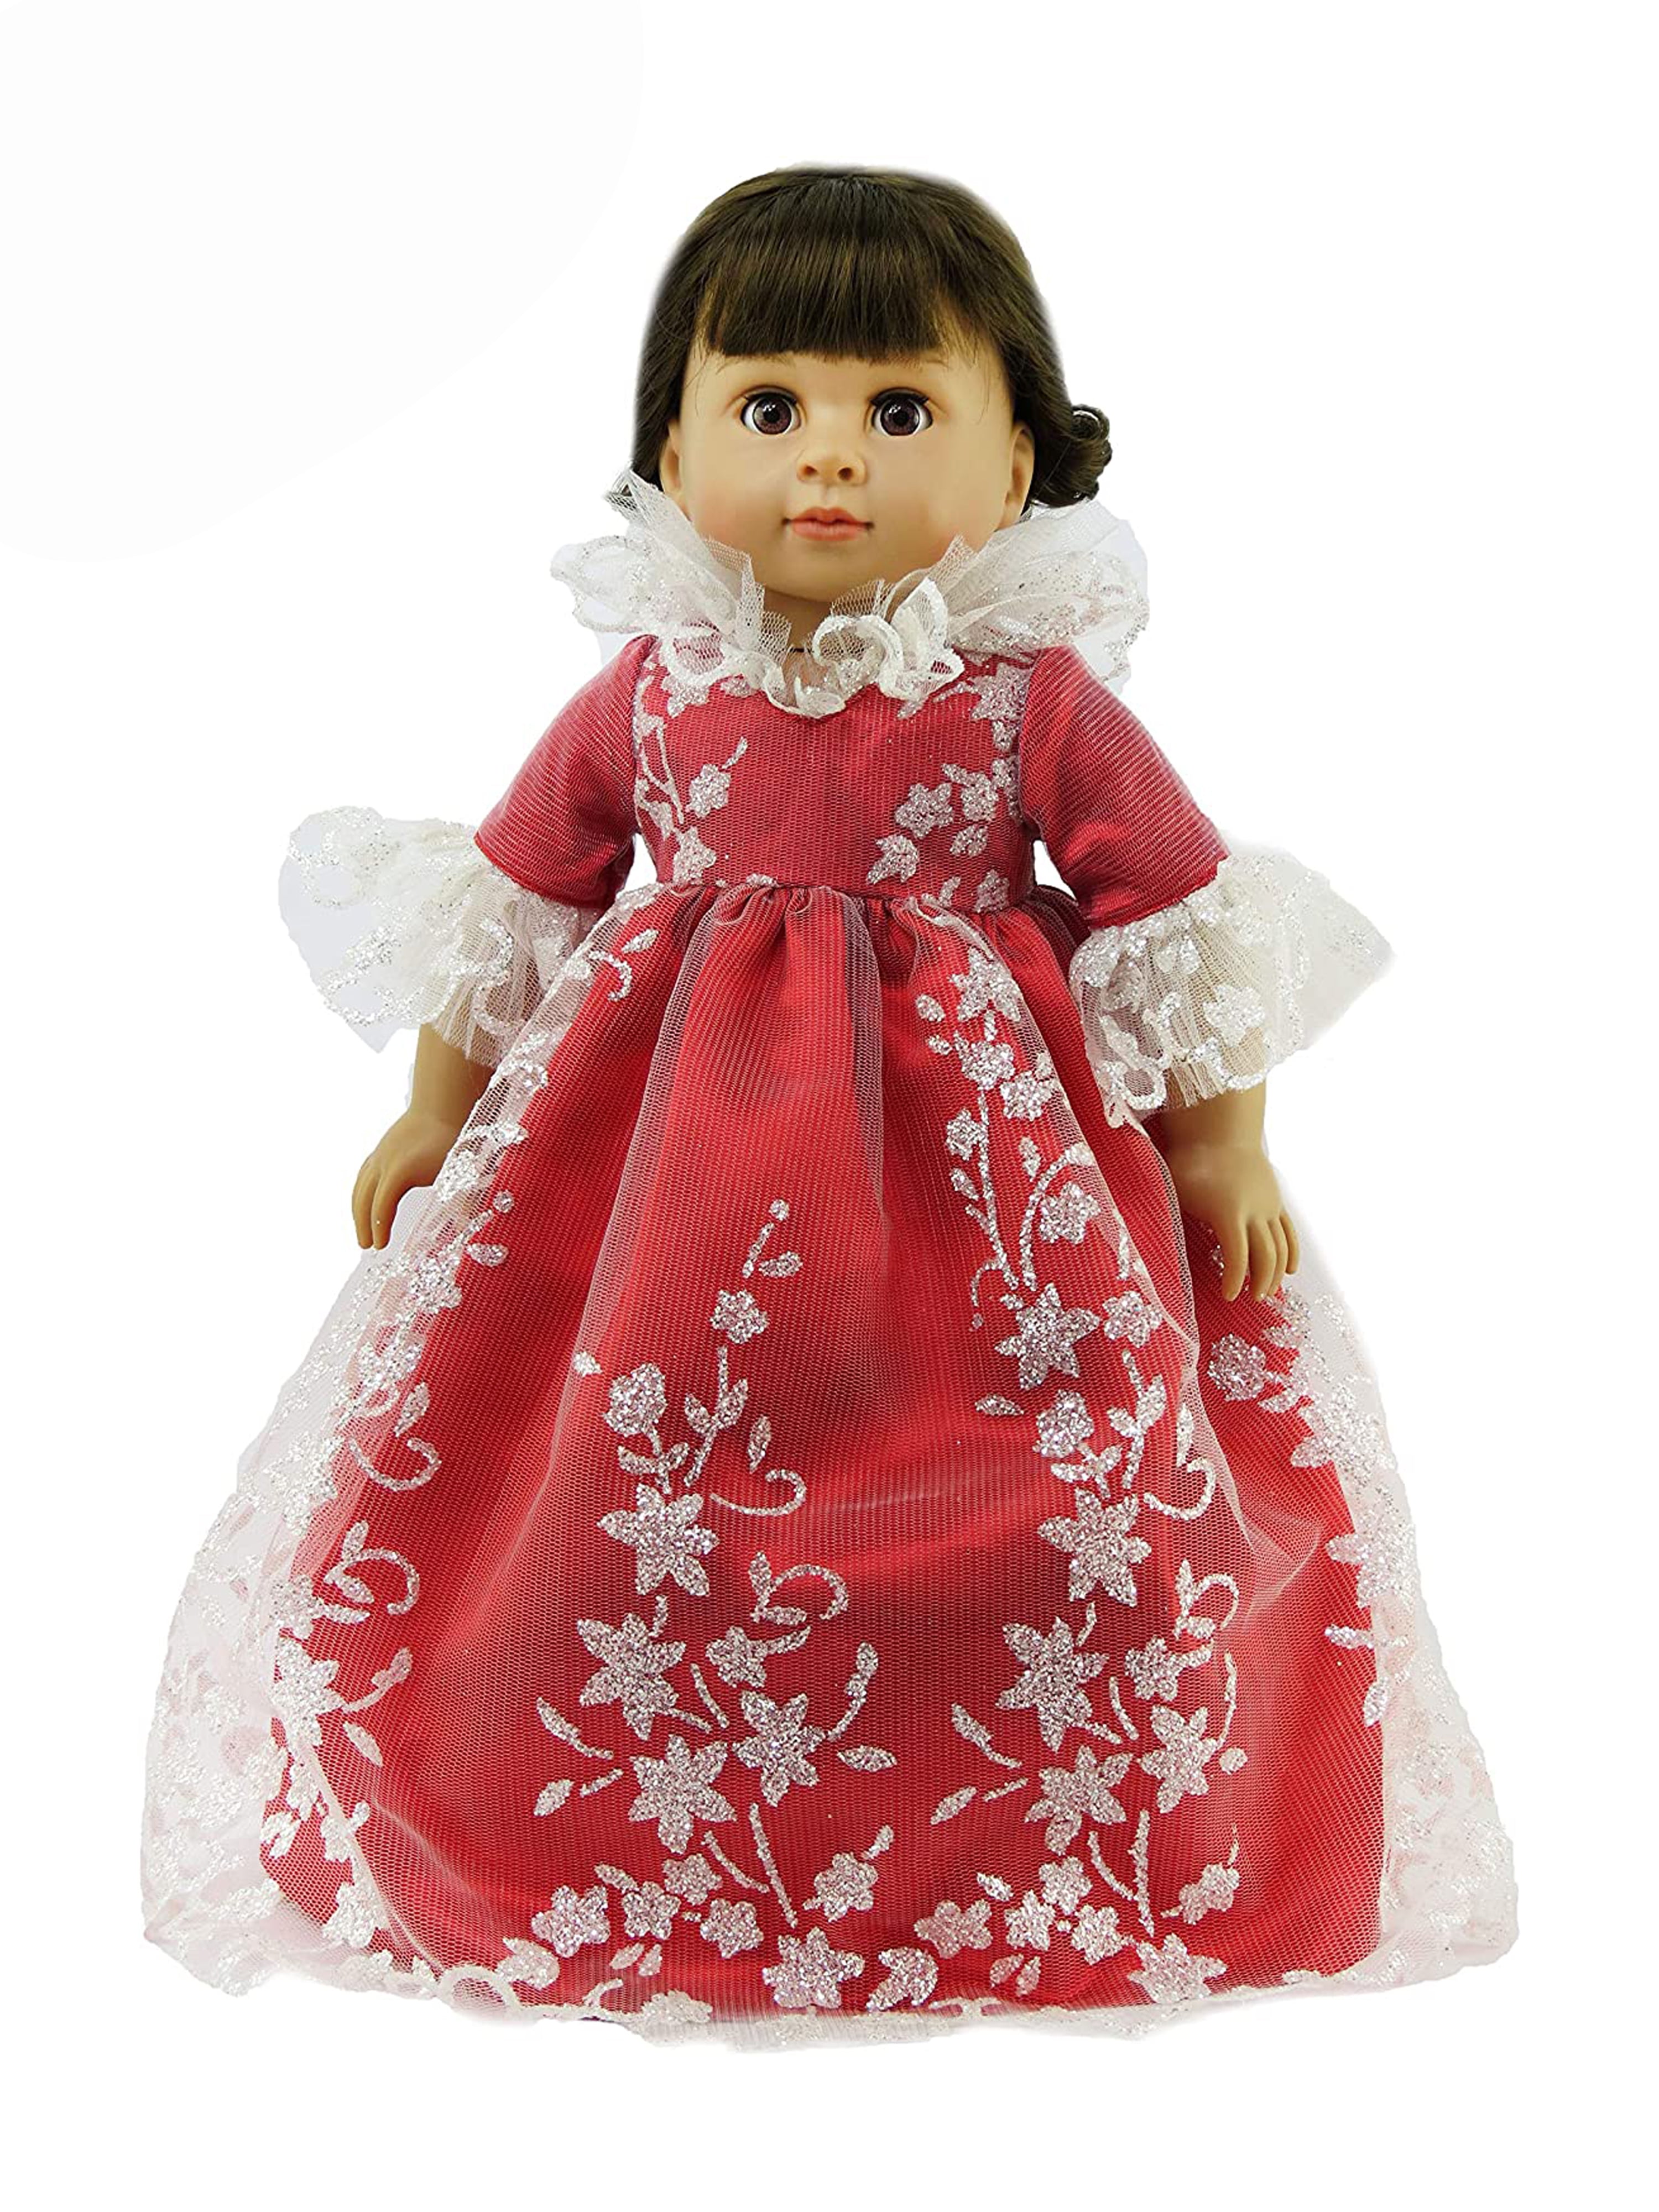 Debs Flag Themed Red Blue White Dress w/Hat Doll Clothes For 18" American Girl 